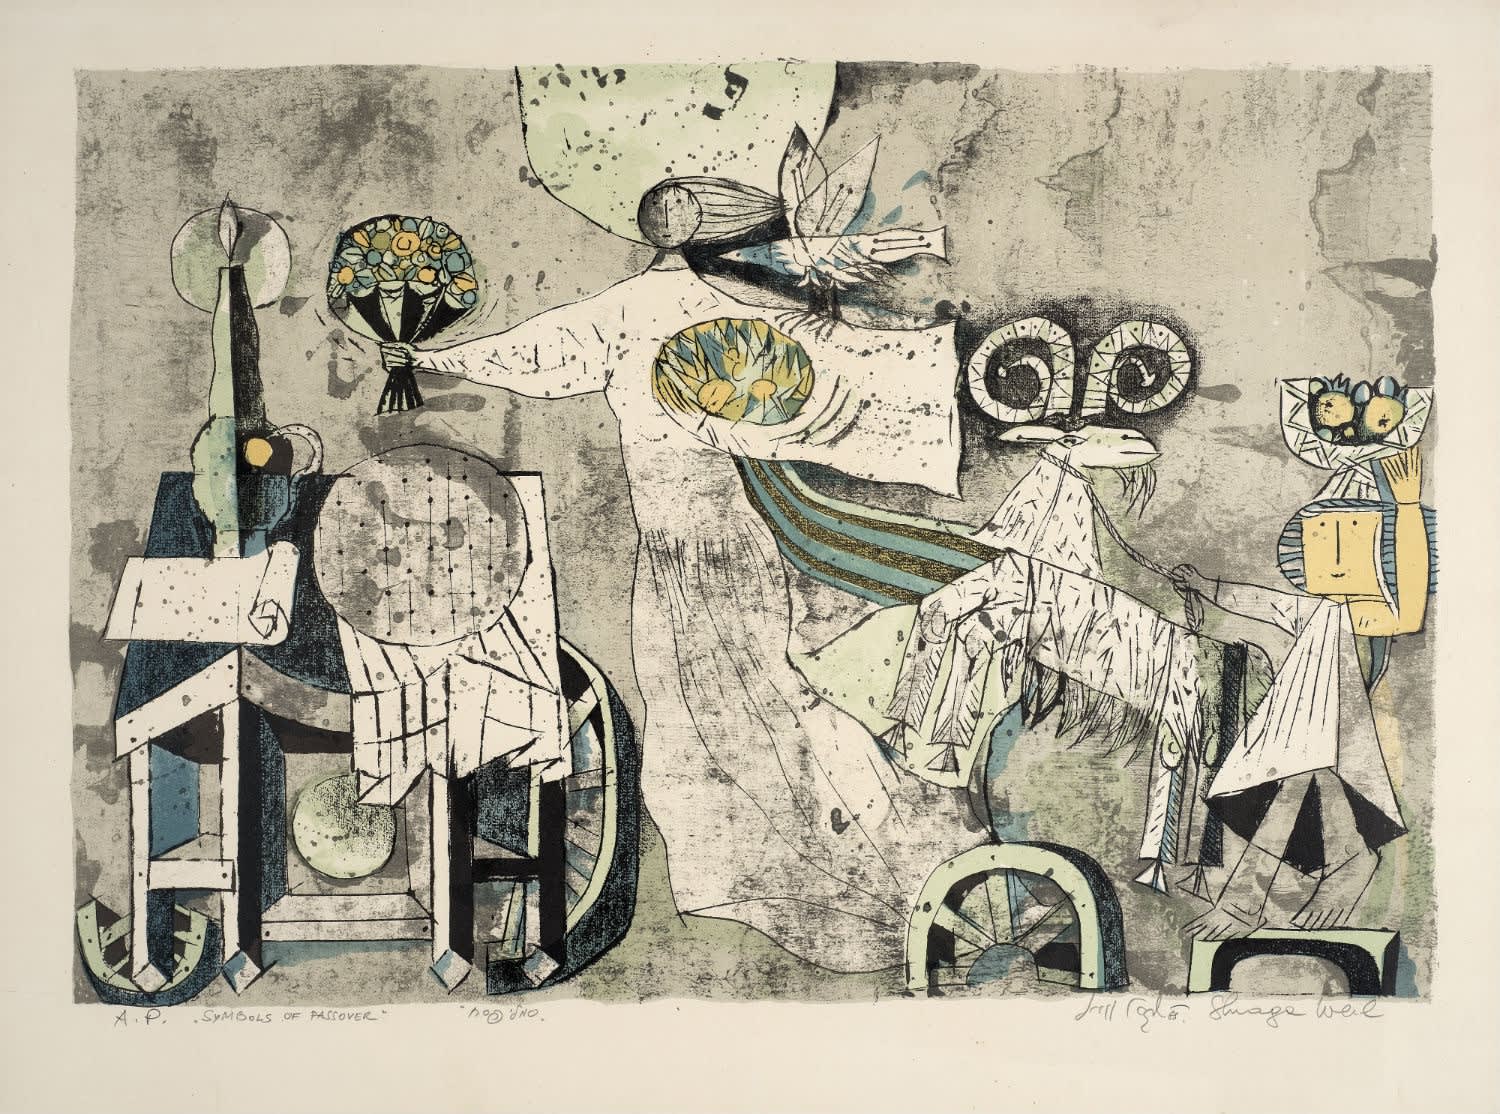 Shraga Weil (1918-2009) Symbols of Passover n.d. Lithography 46.5 x 61 cm cm Ben Uri Collection